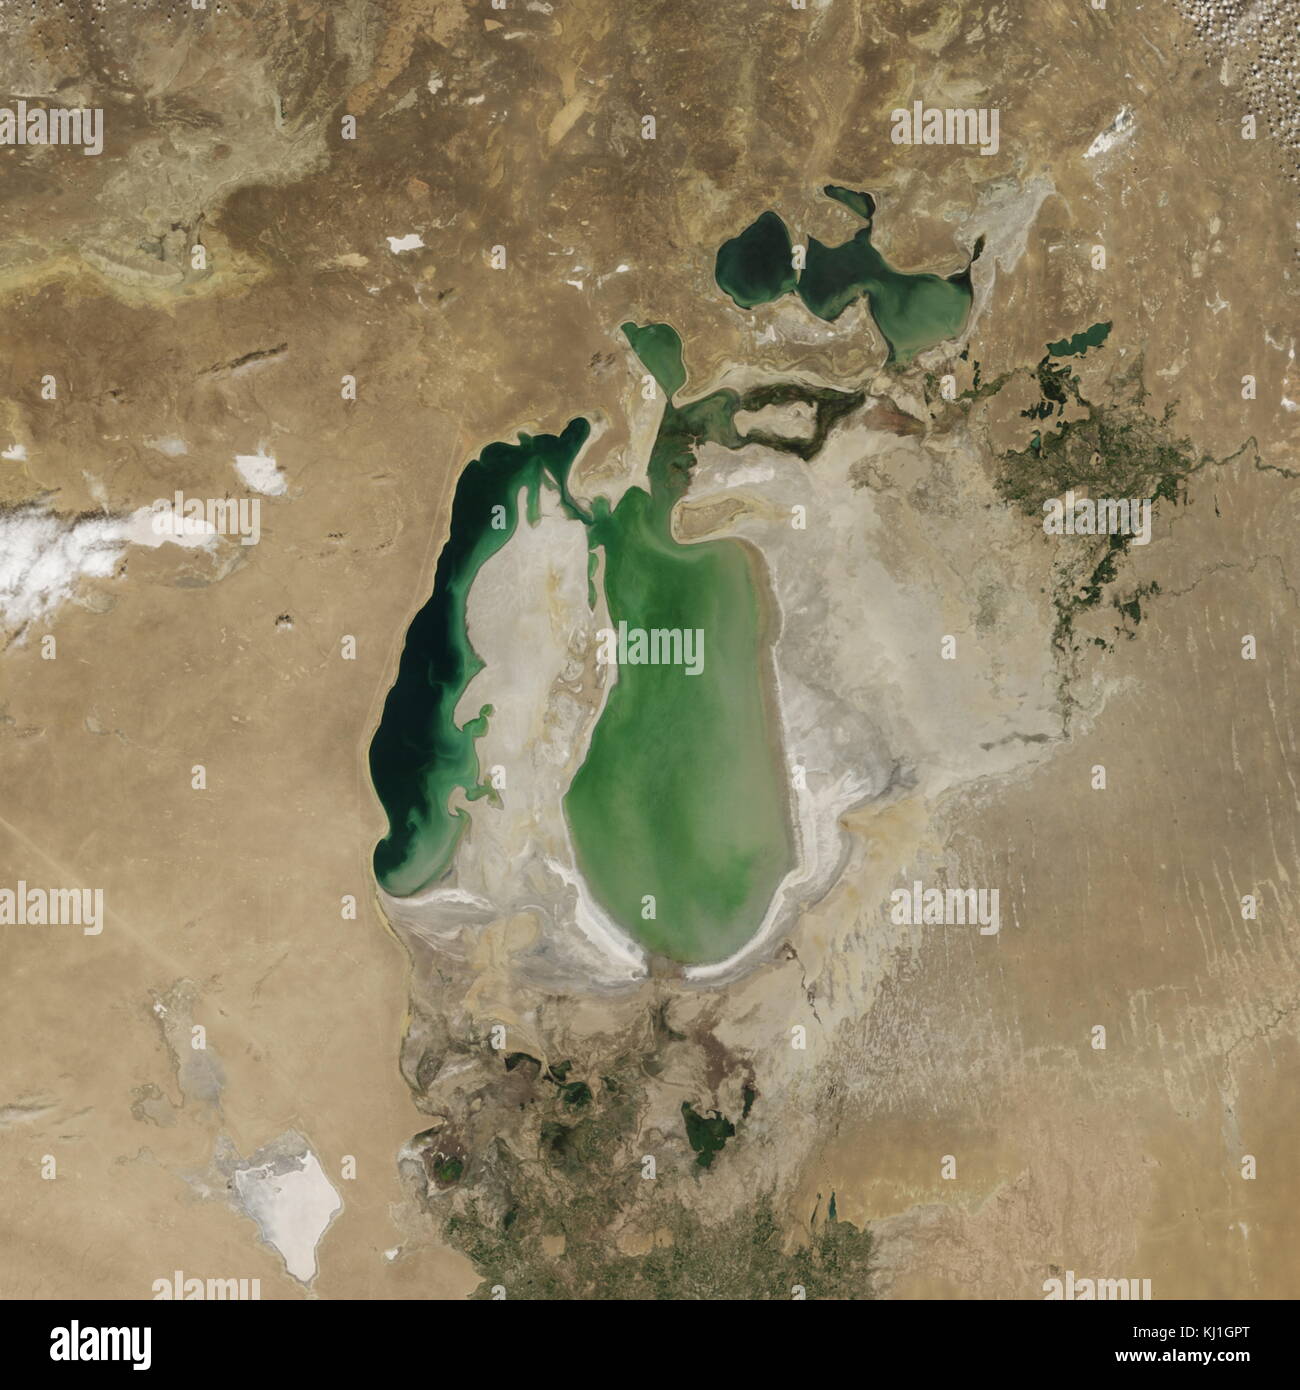 Satellite image of the shrinking of the Aral Sea taken in 2002. The Aral Sea, is a lake lying between Kazakhstan, in the north and Uzbekistan in the south. The name roughly translates as 'Sea of Islands', referring to over 1,100 islands that once dotted its waters; Formerly one of the four largest lakes in the world with an area of 68,000 km2 (26,300 sq mi), the Aral Sea has been steadily shrinking since the 1960s after the rivers that fed it were diverted by Soviet irrigation projects. Stock Photo